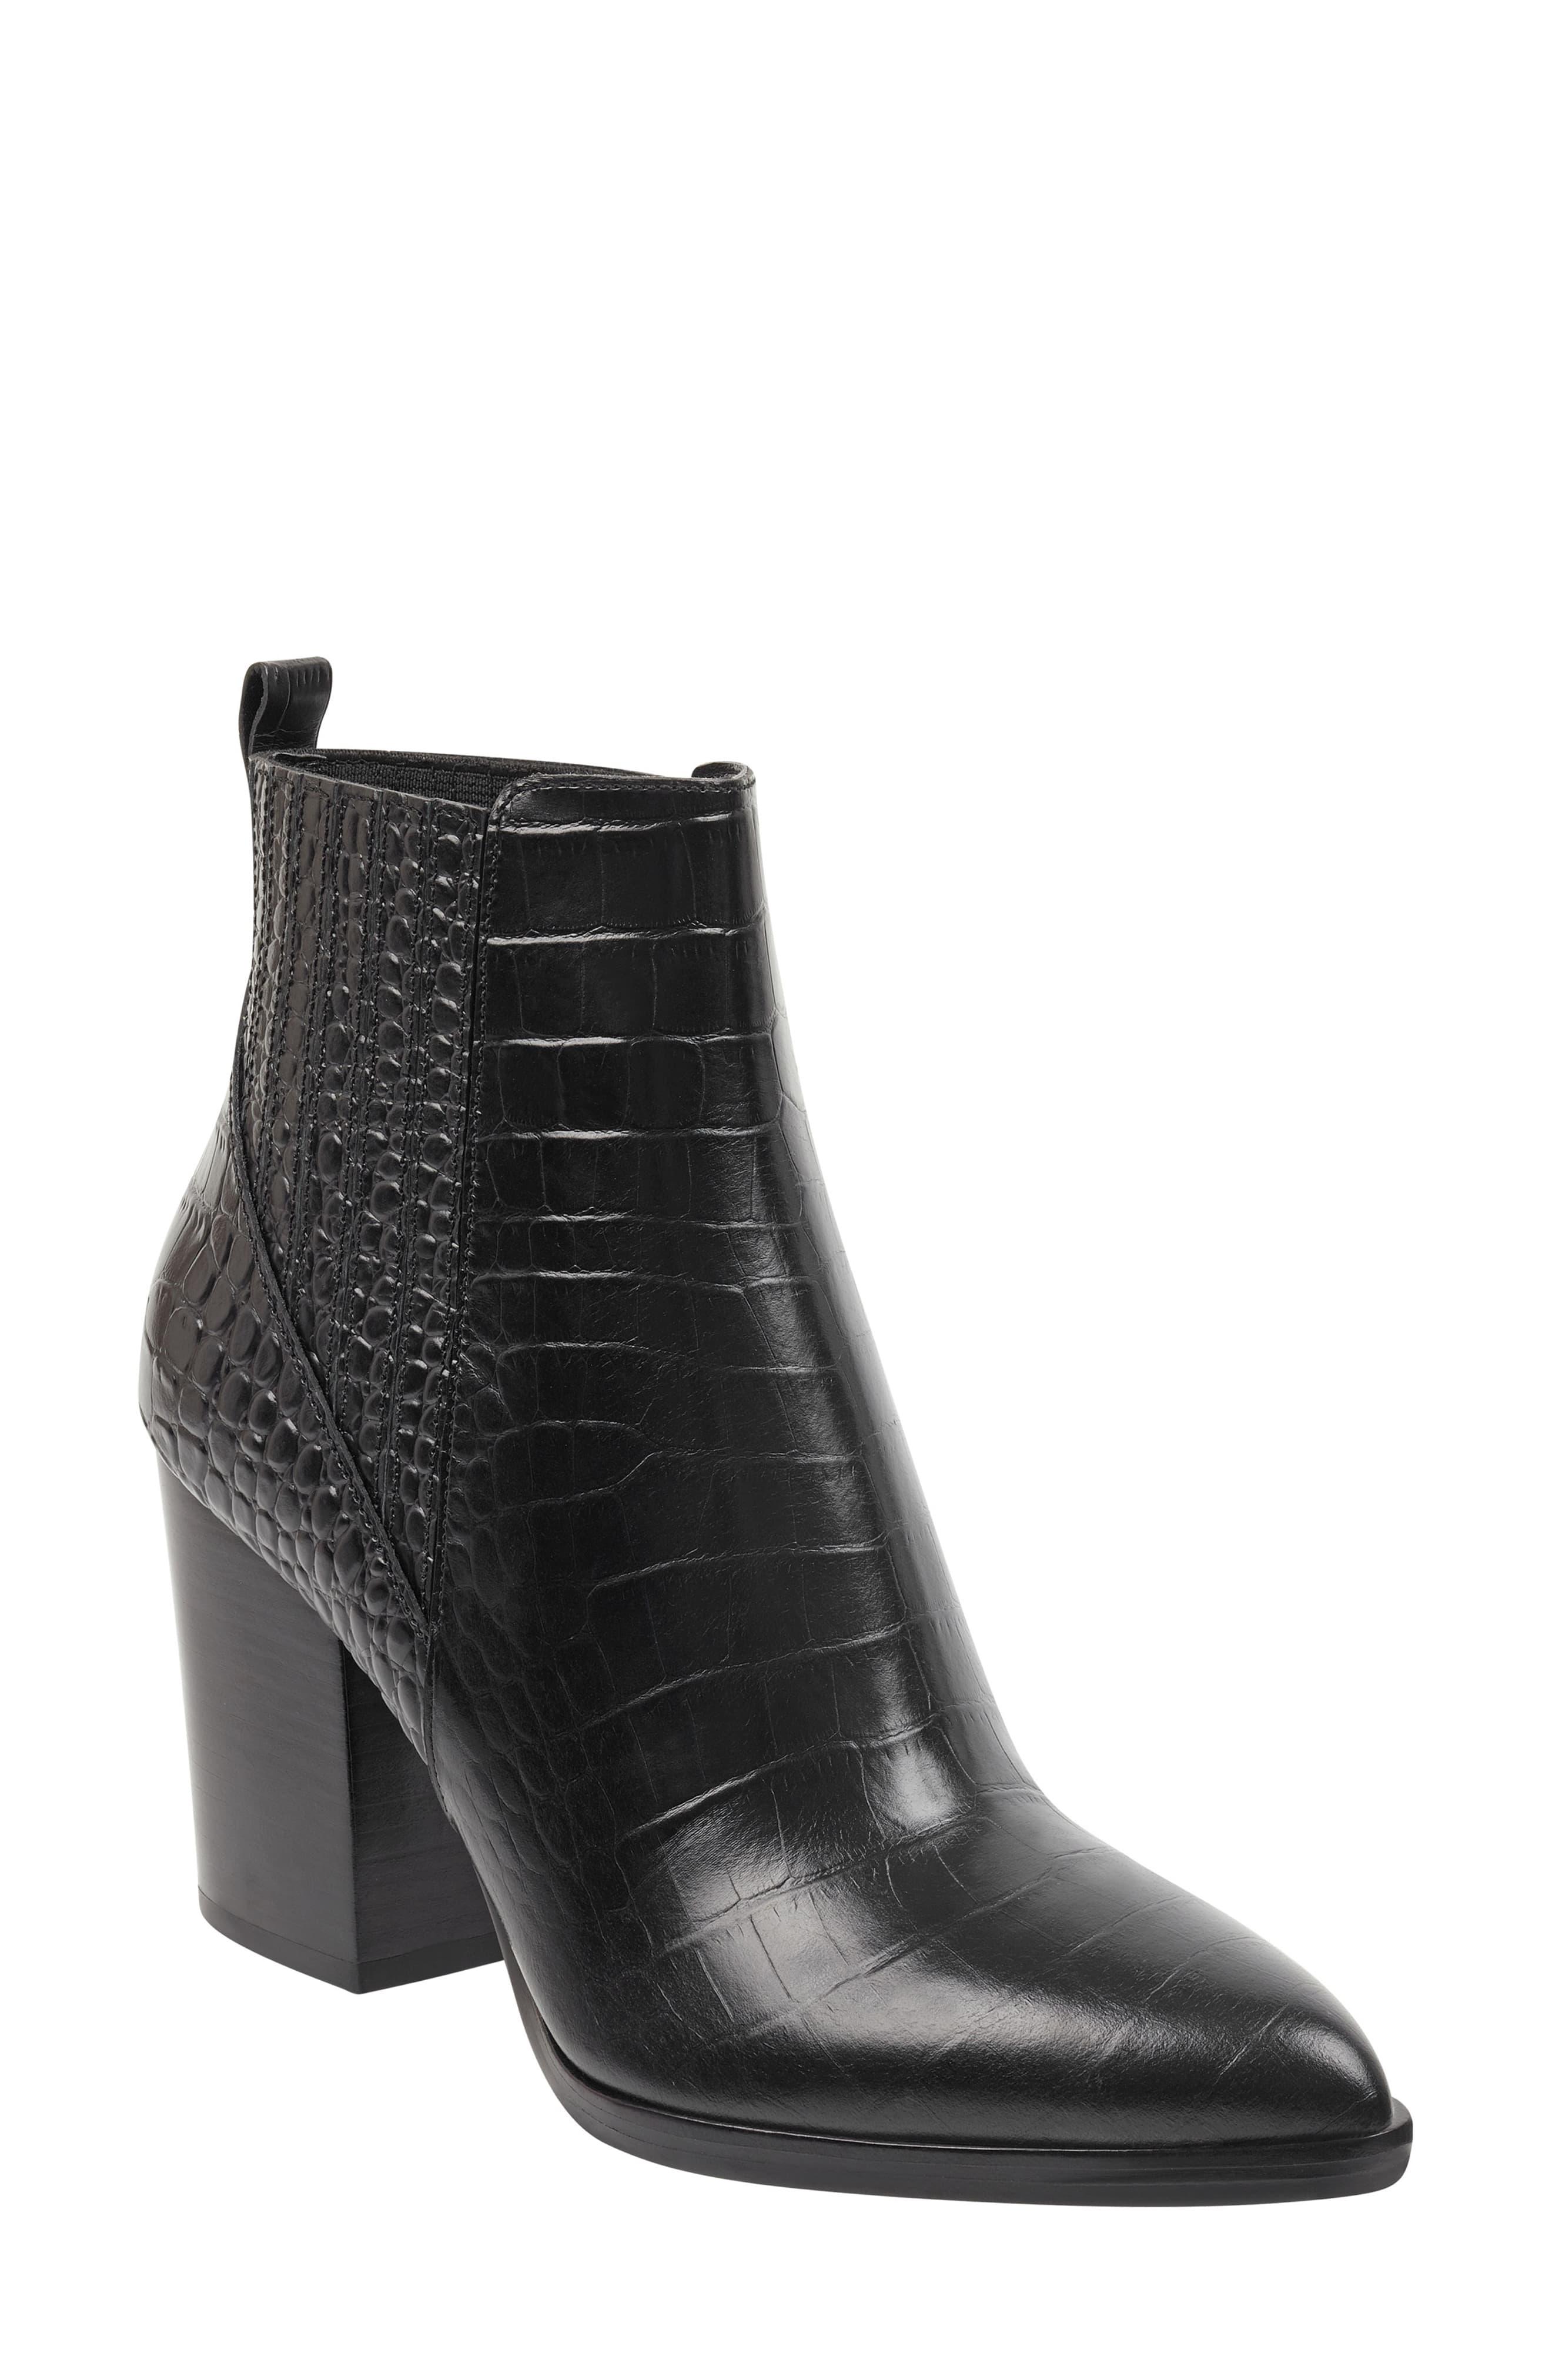 Marc Fisher Alva Bootie in Black Embossed Leather (Black) - Save 17% - Lyst